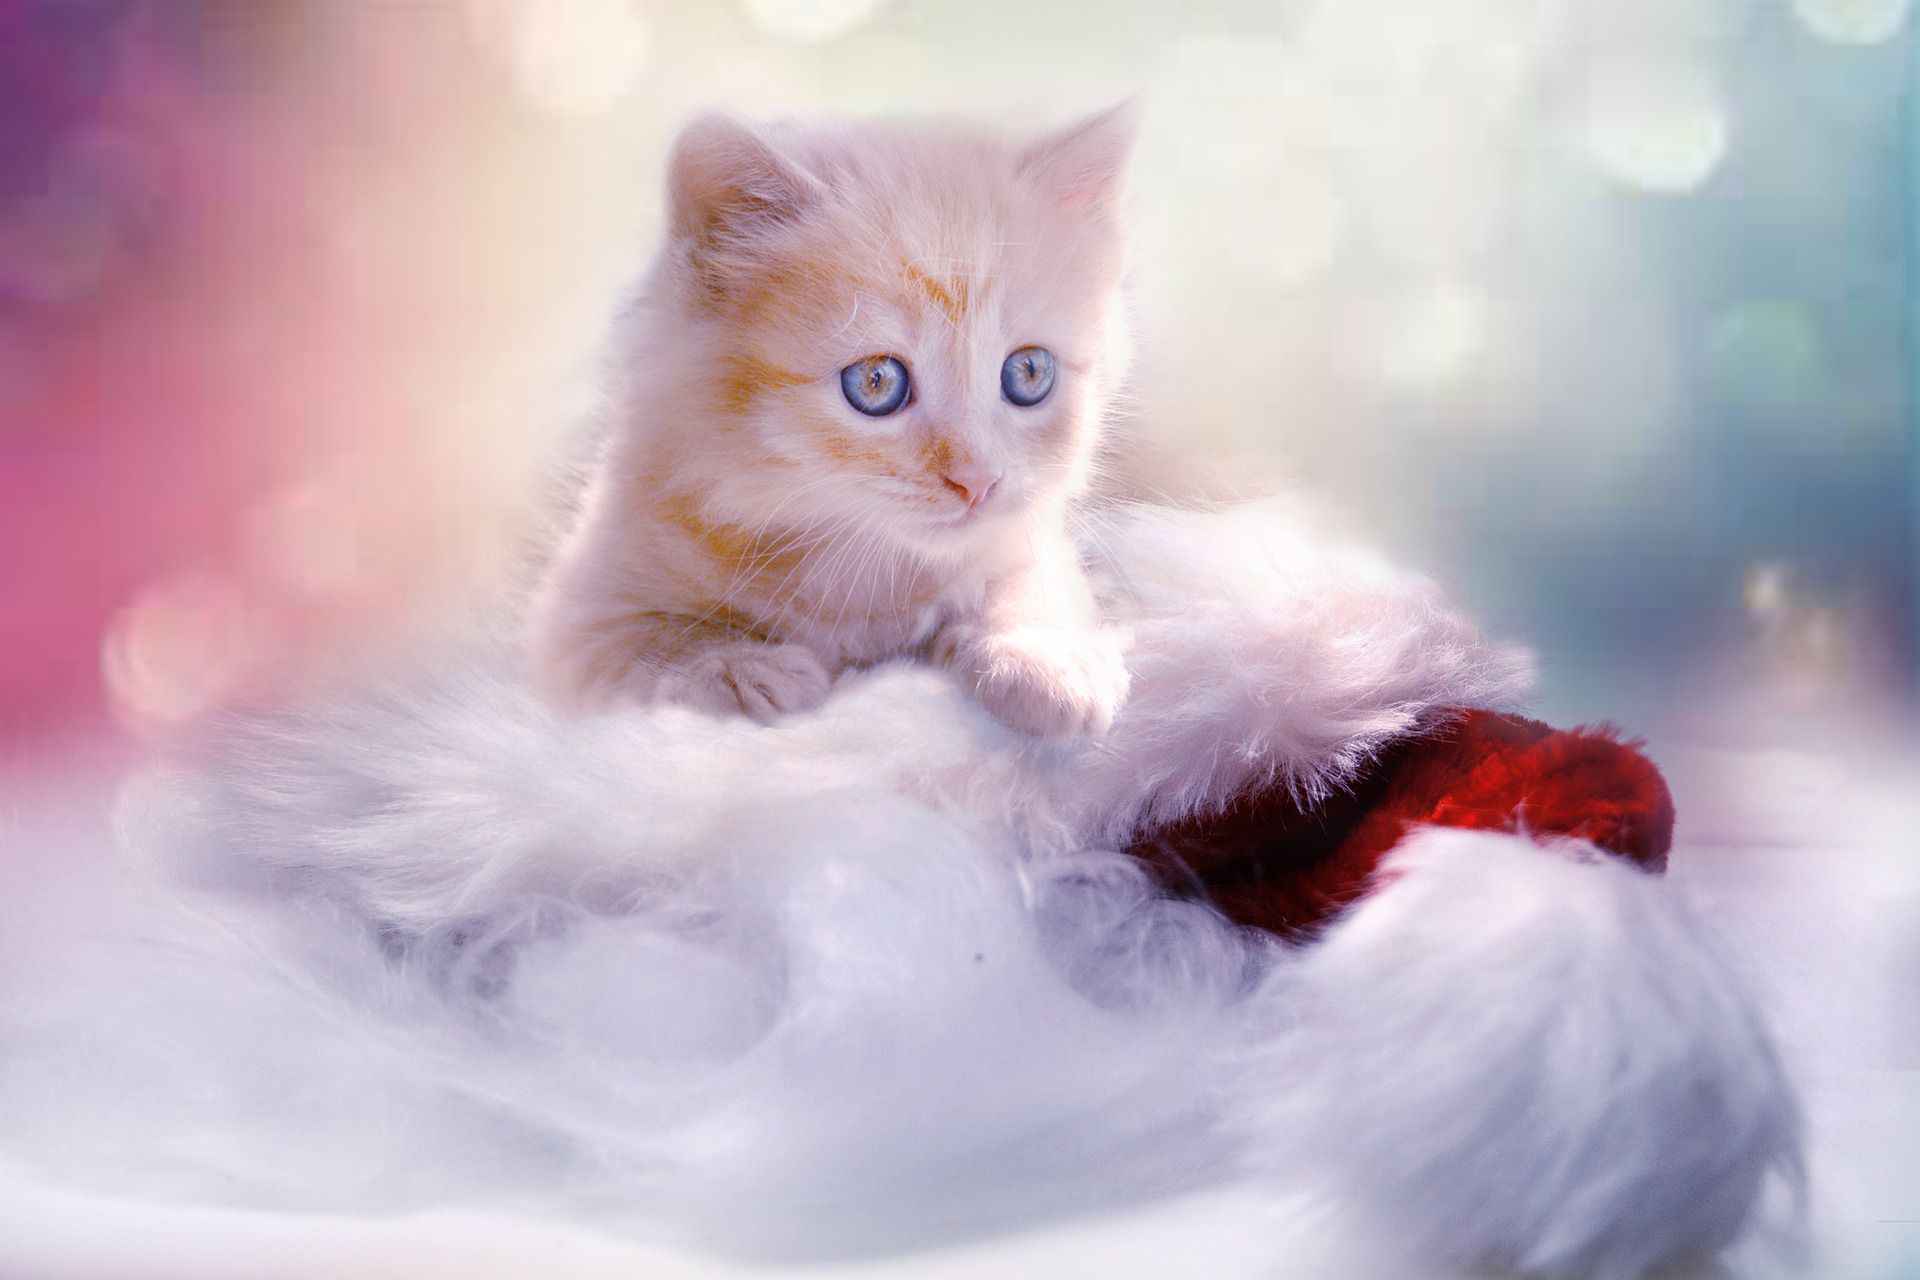 How to have a merry Christmas with pets